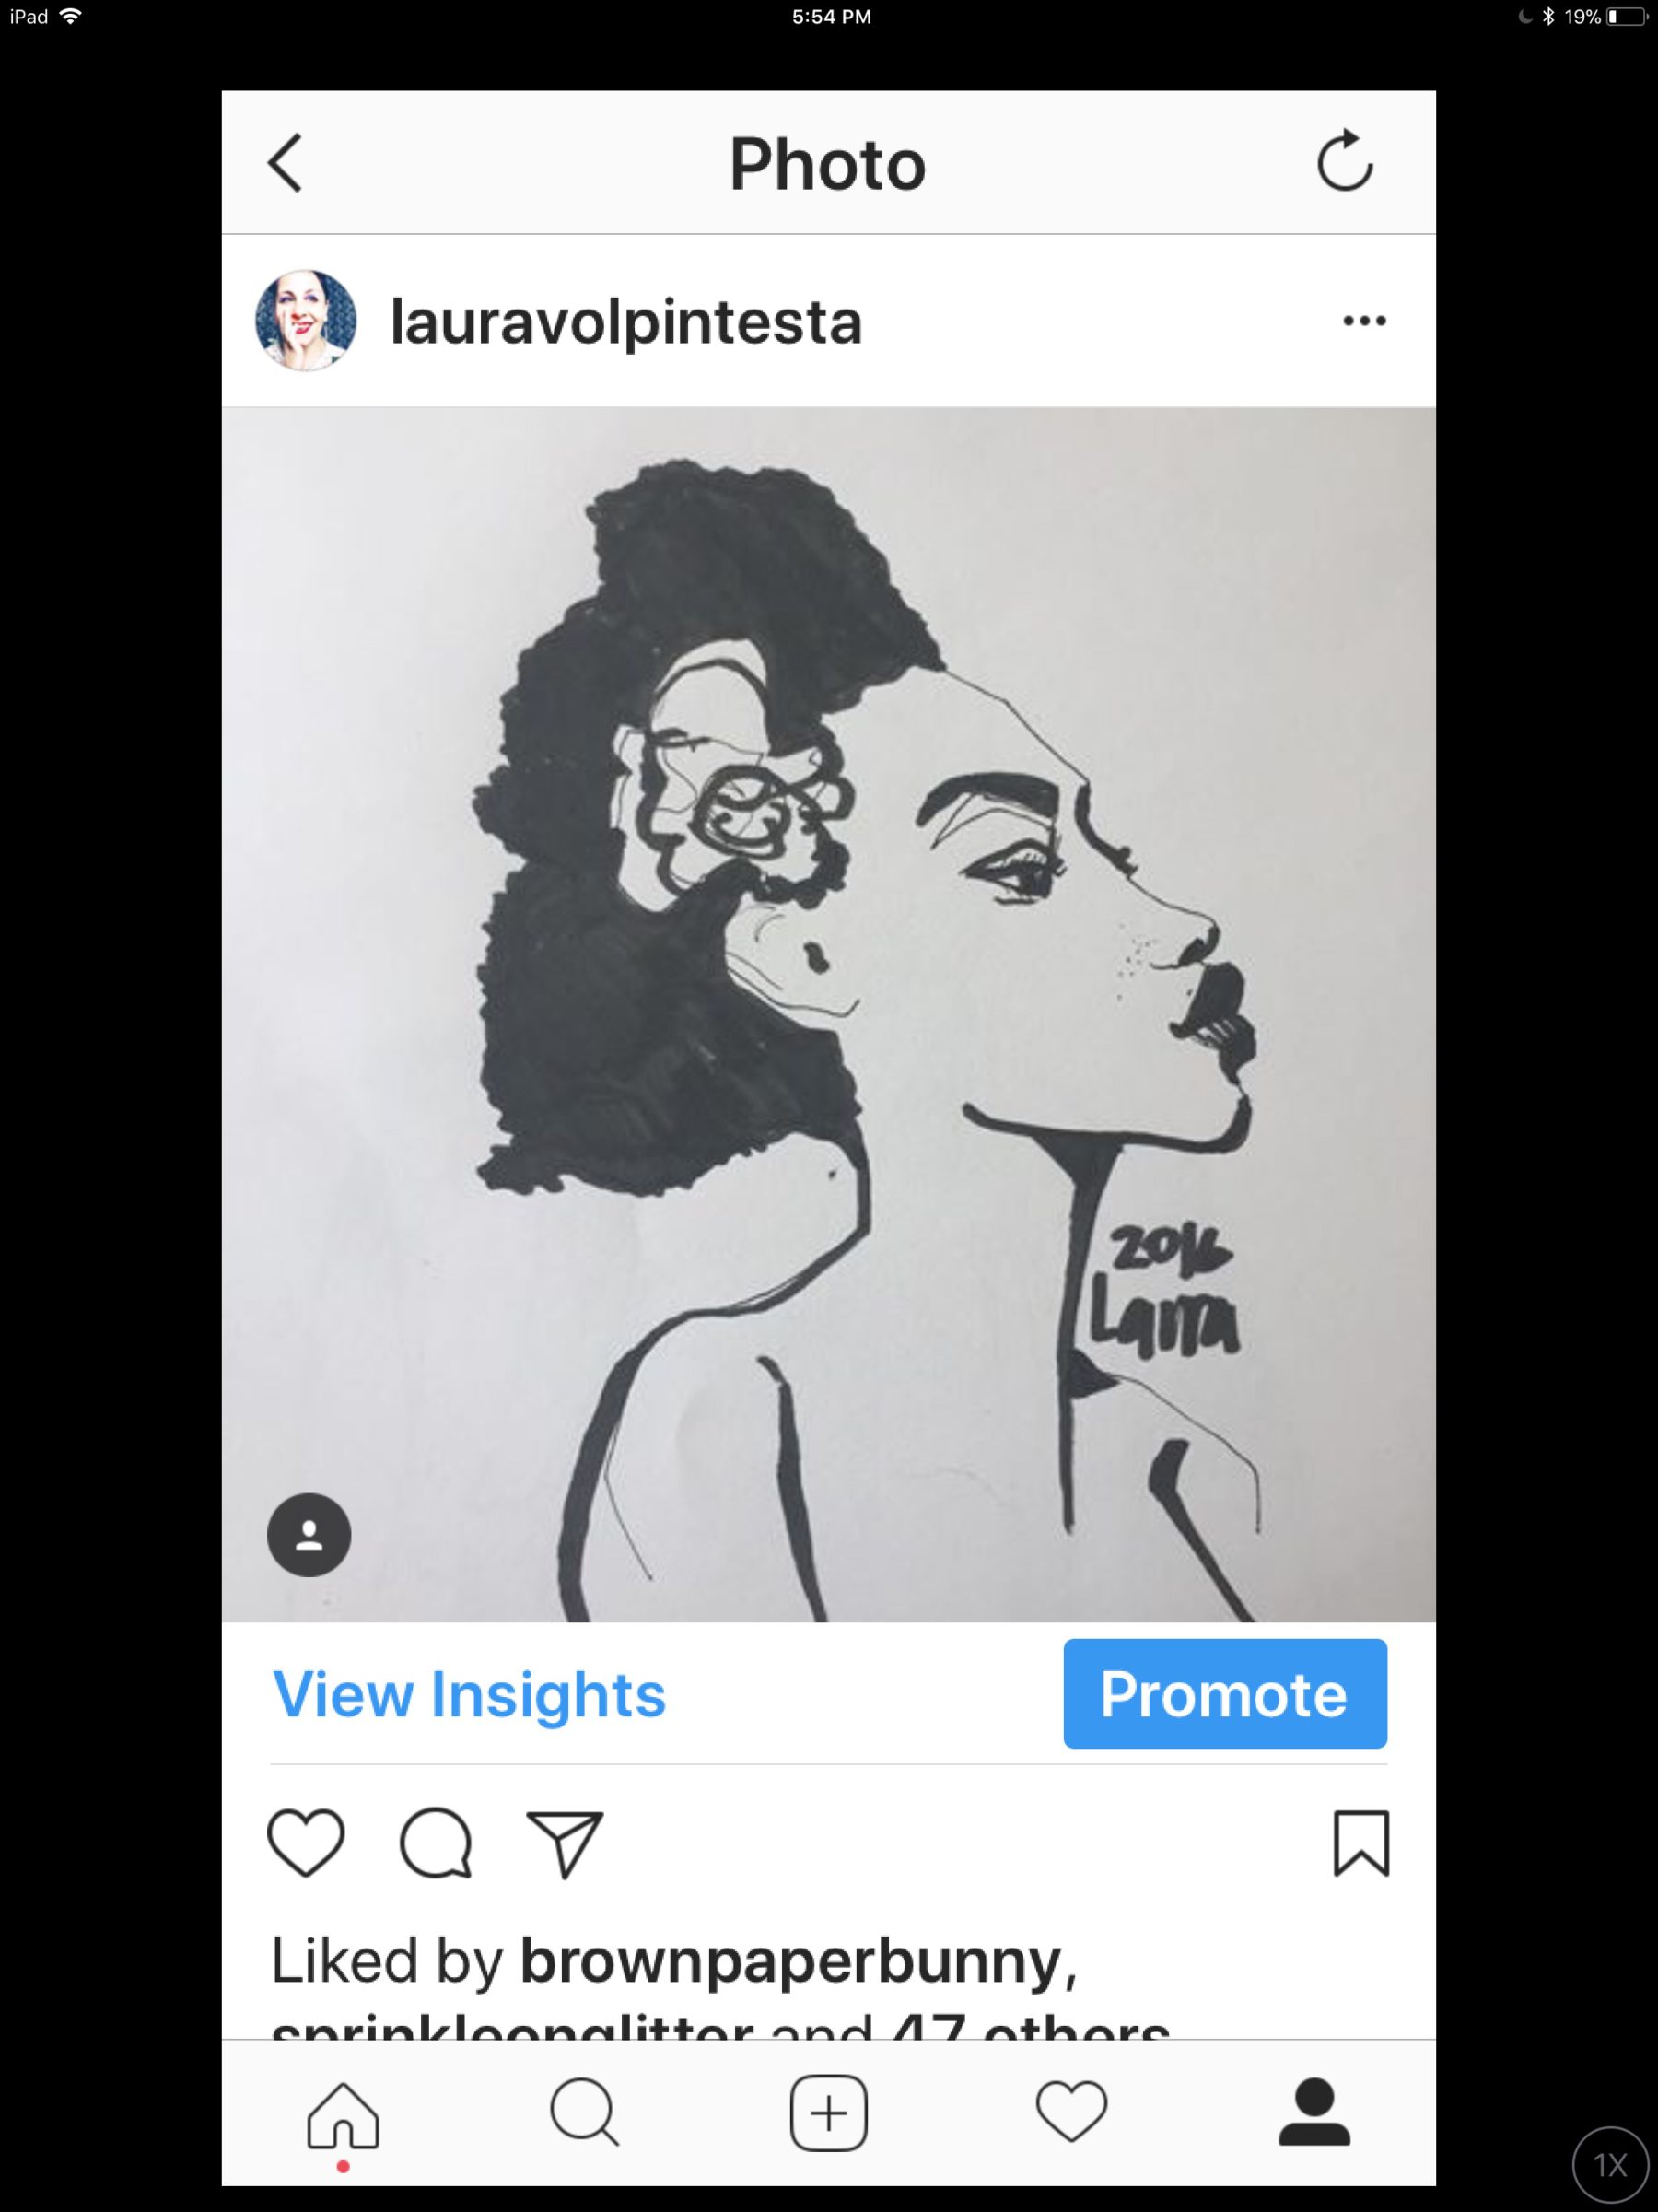 Social Media coloring in Instagram Stories: FASHION ILLUSTRATION BY LAURA VOLPINTESTAhttps://app.ruzuku.com/courses/16304/about